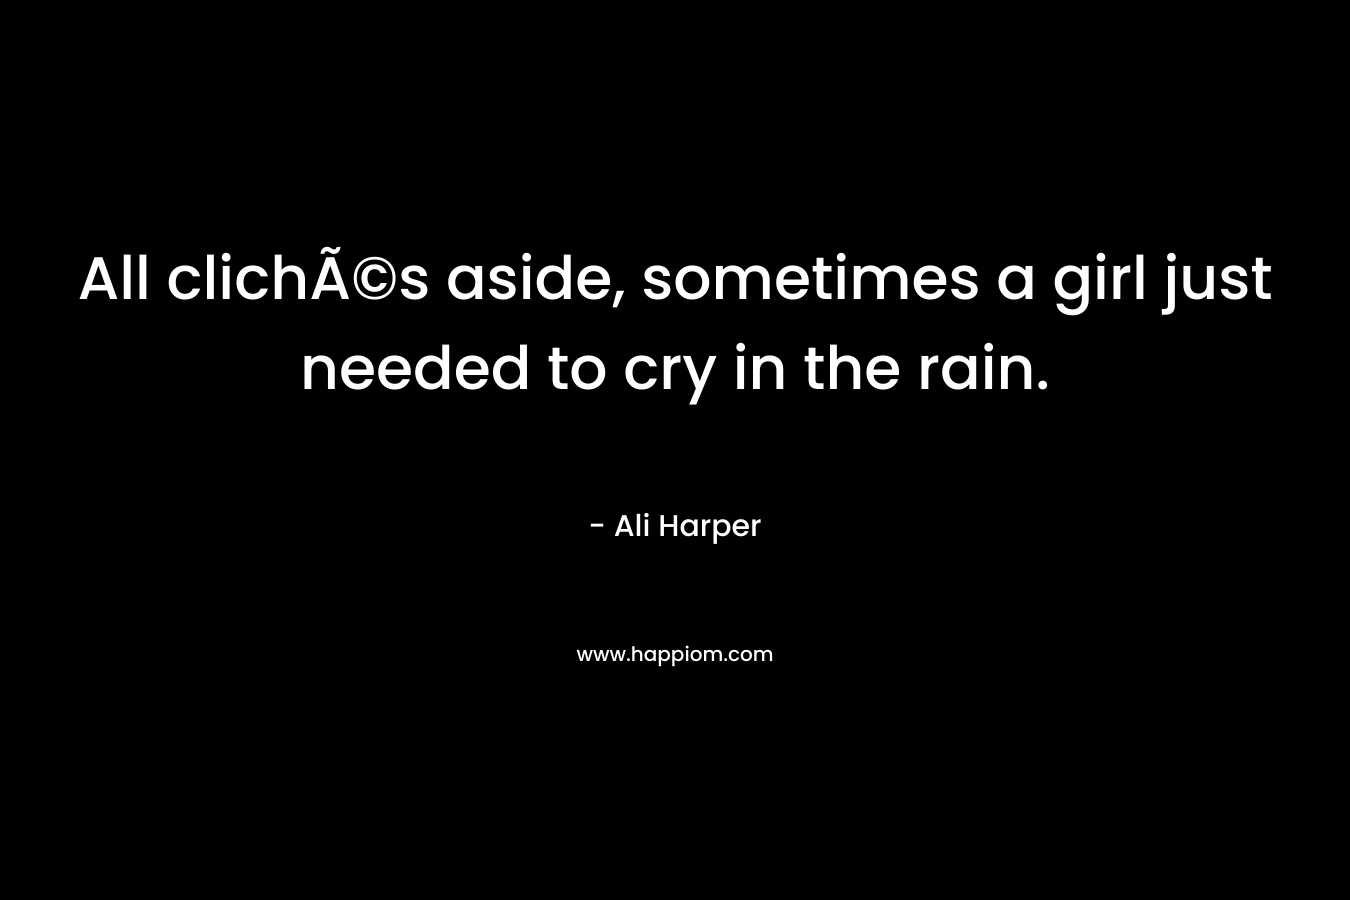 All clichÃ©s aside, sometimes a girl just needed to cry in the rain. – Ali Harper